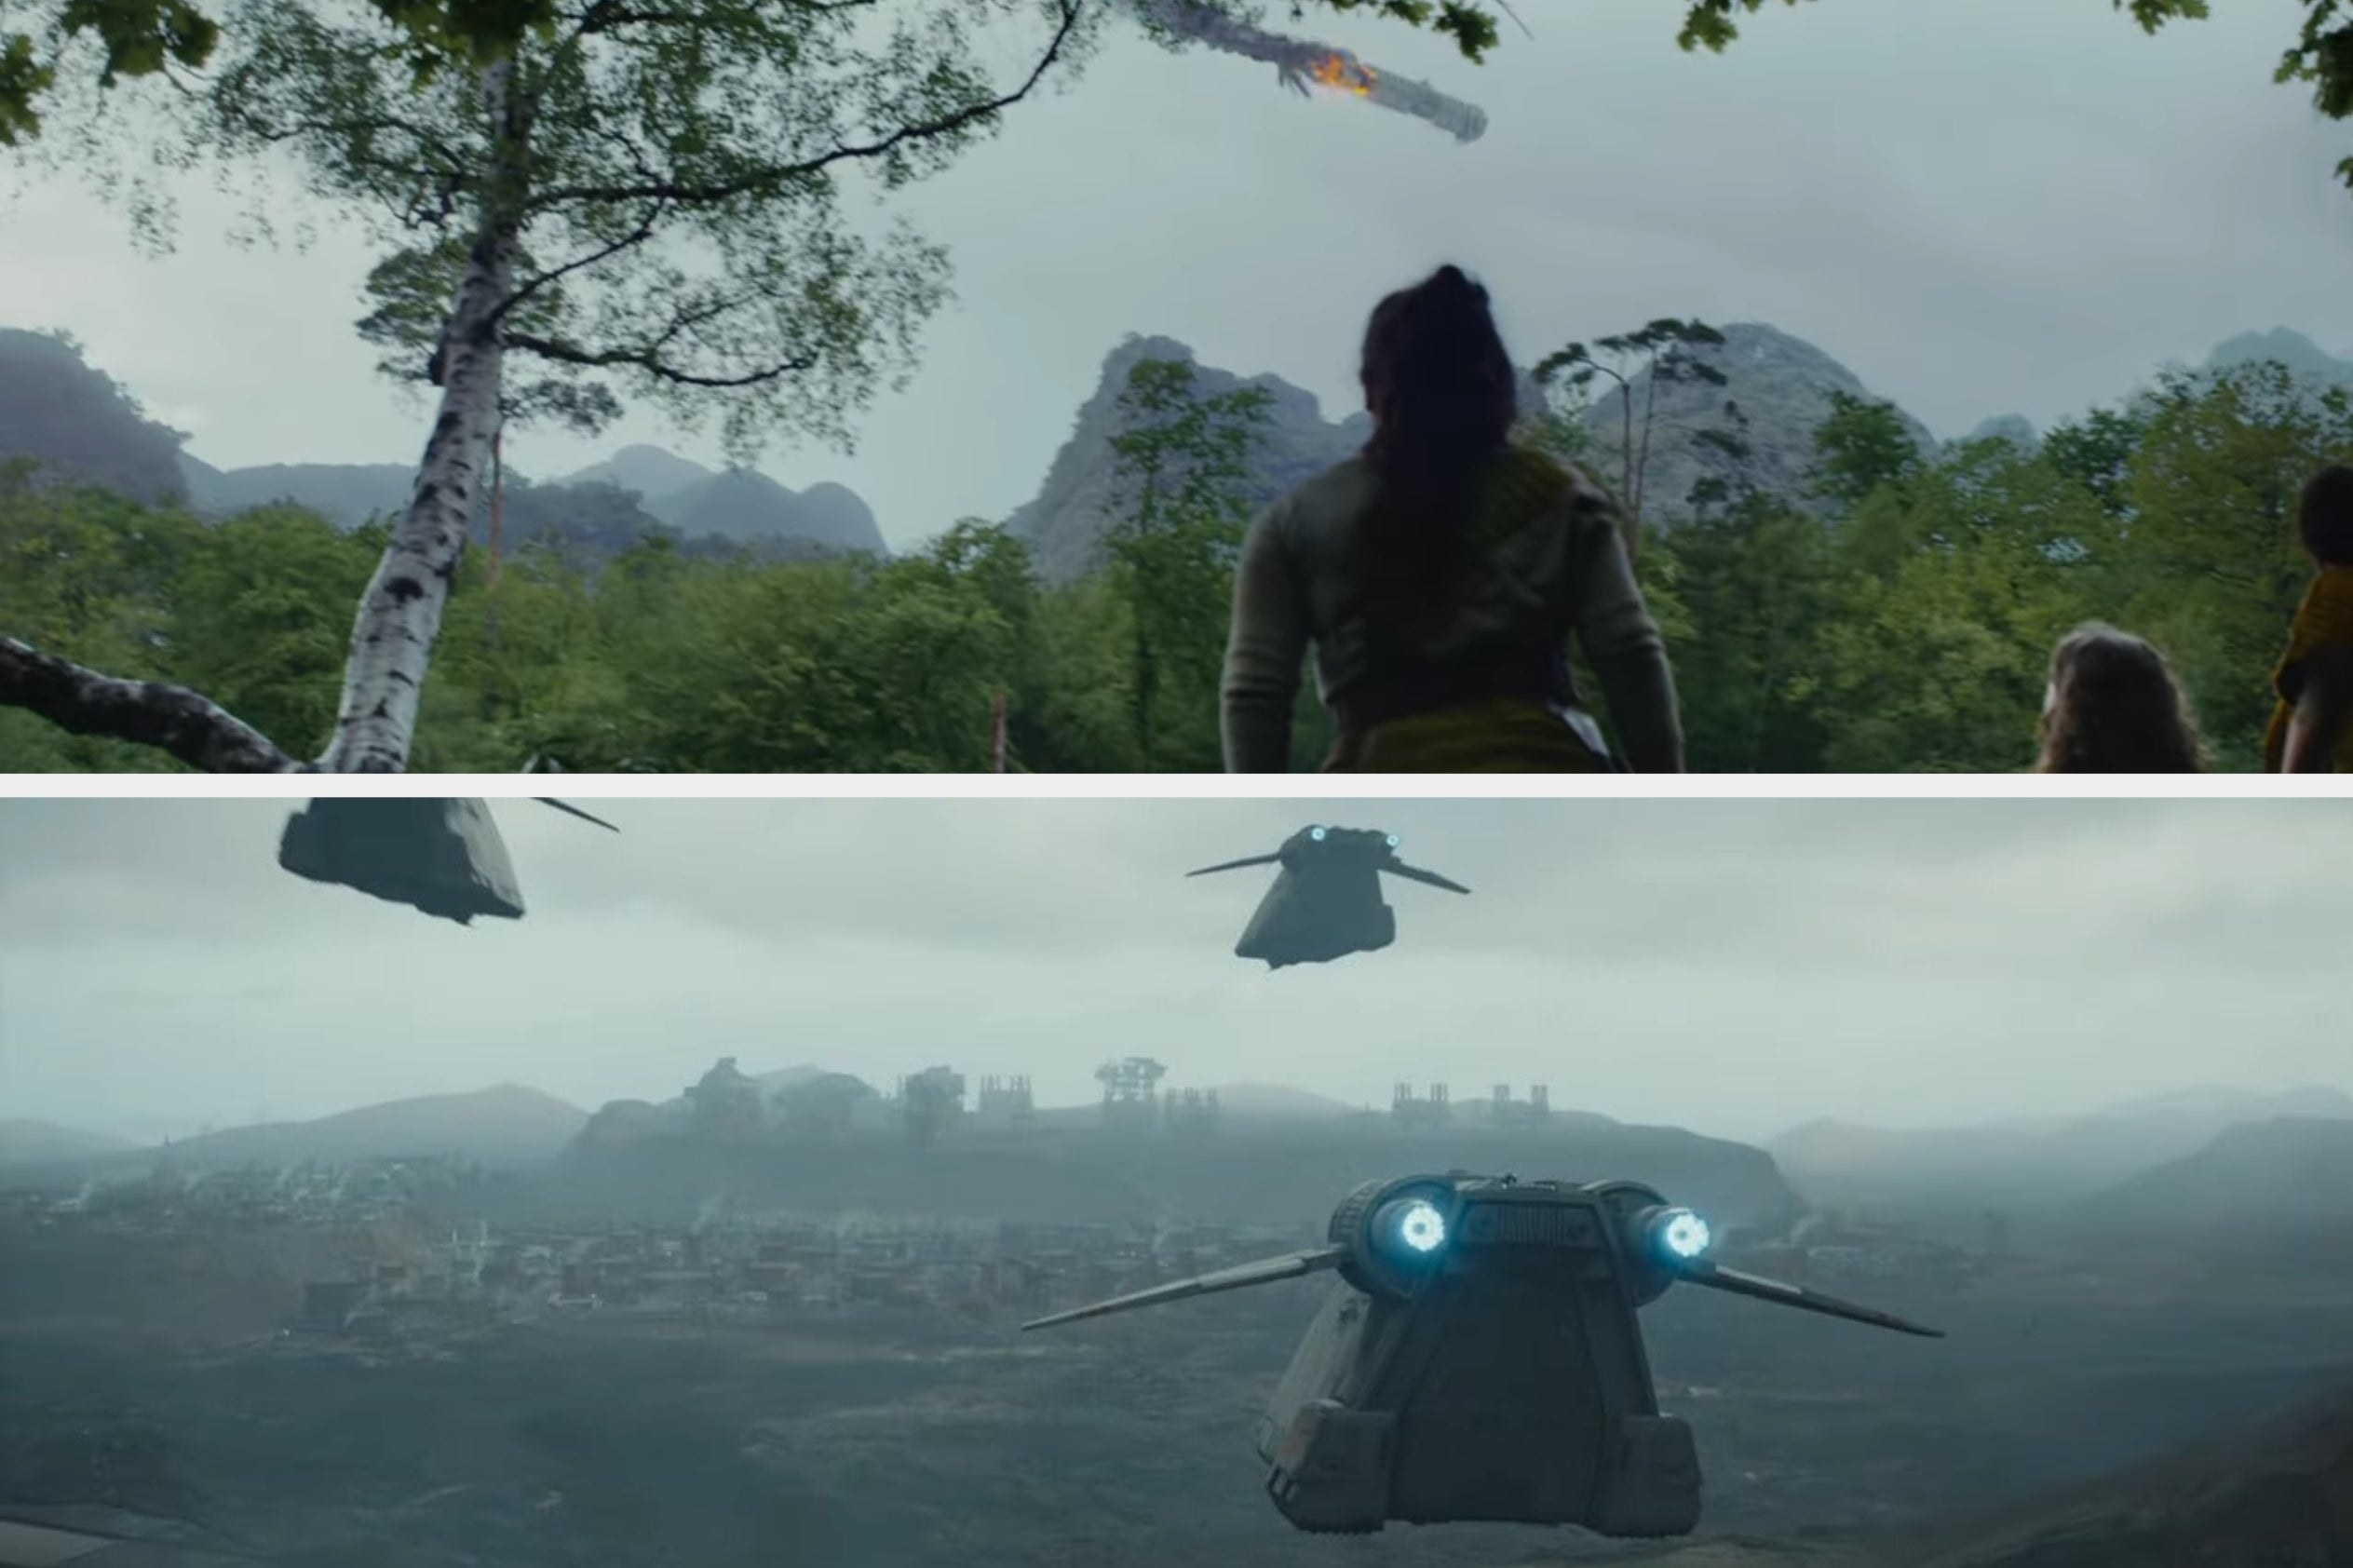 The first trailer of Star Wars' Andor is here, and the rebels are back